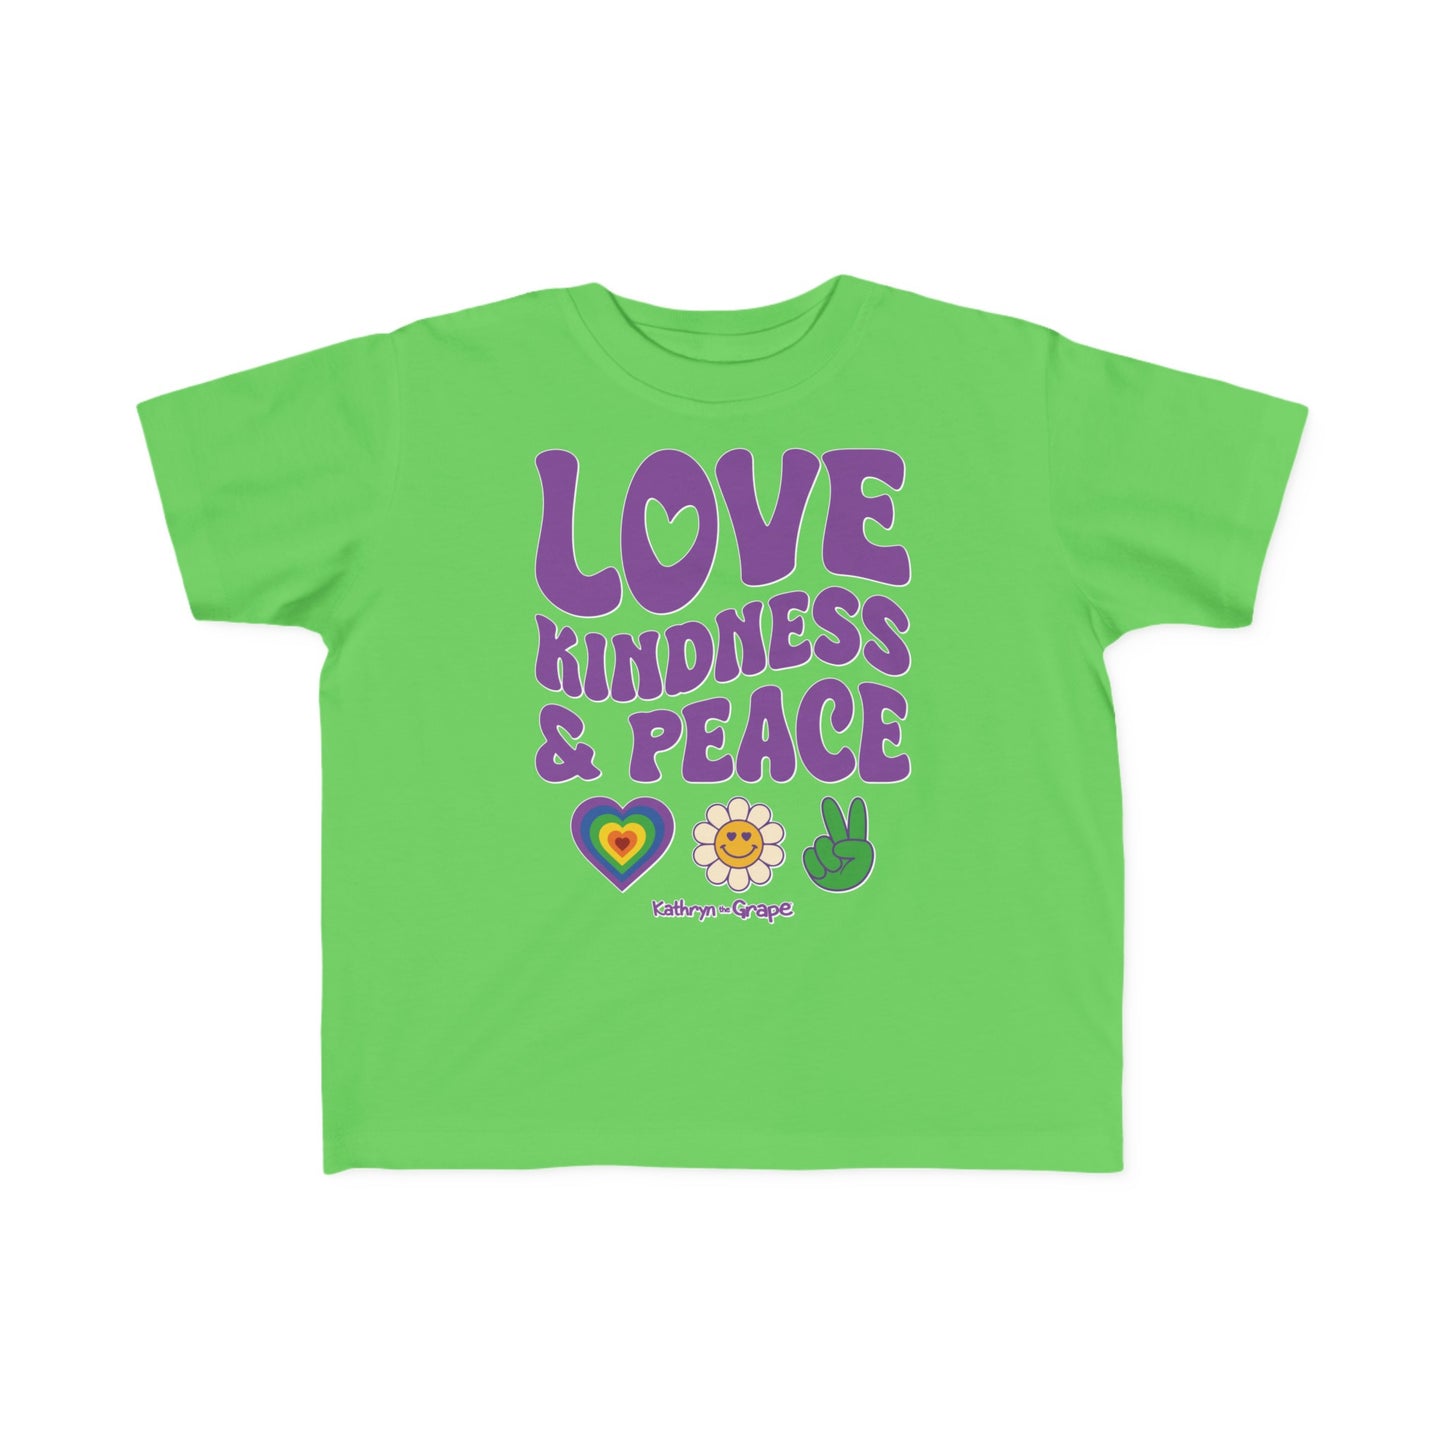 Kathryn the Grape Love, Kindness, and Peace Toddler's Fine Jersey Tee